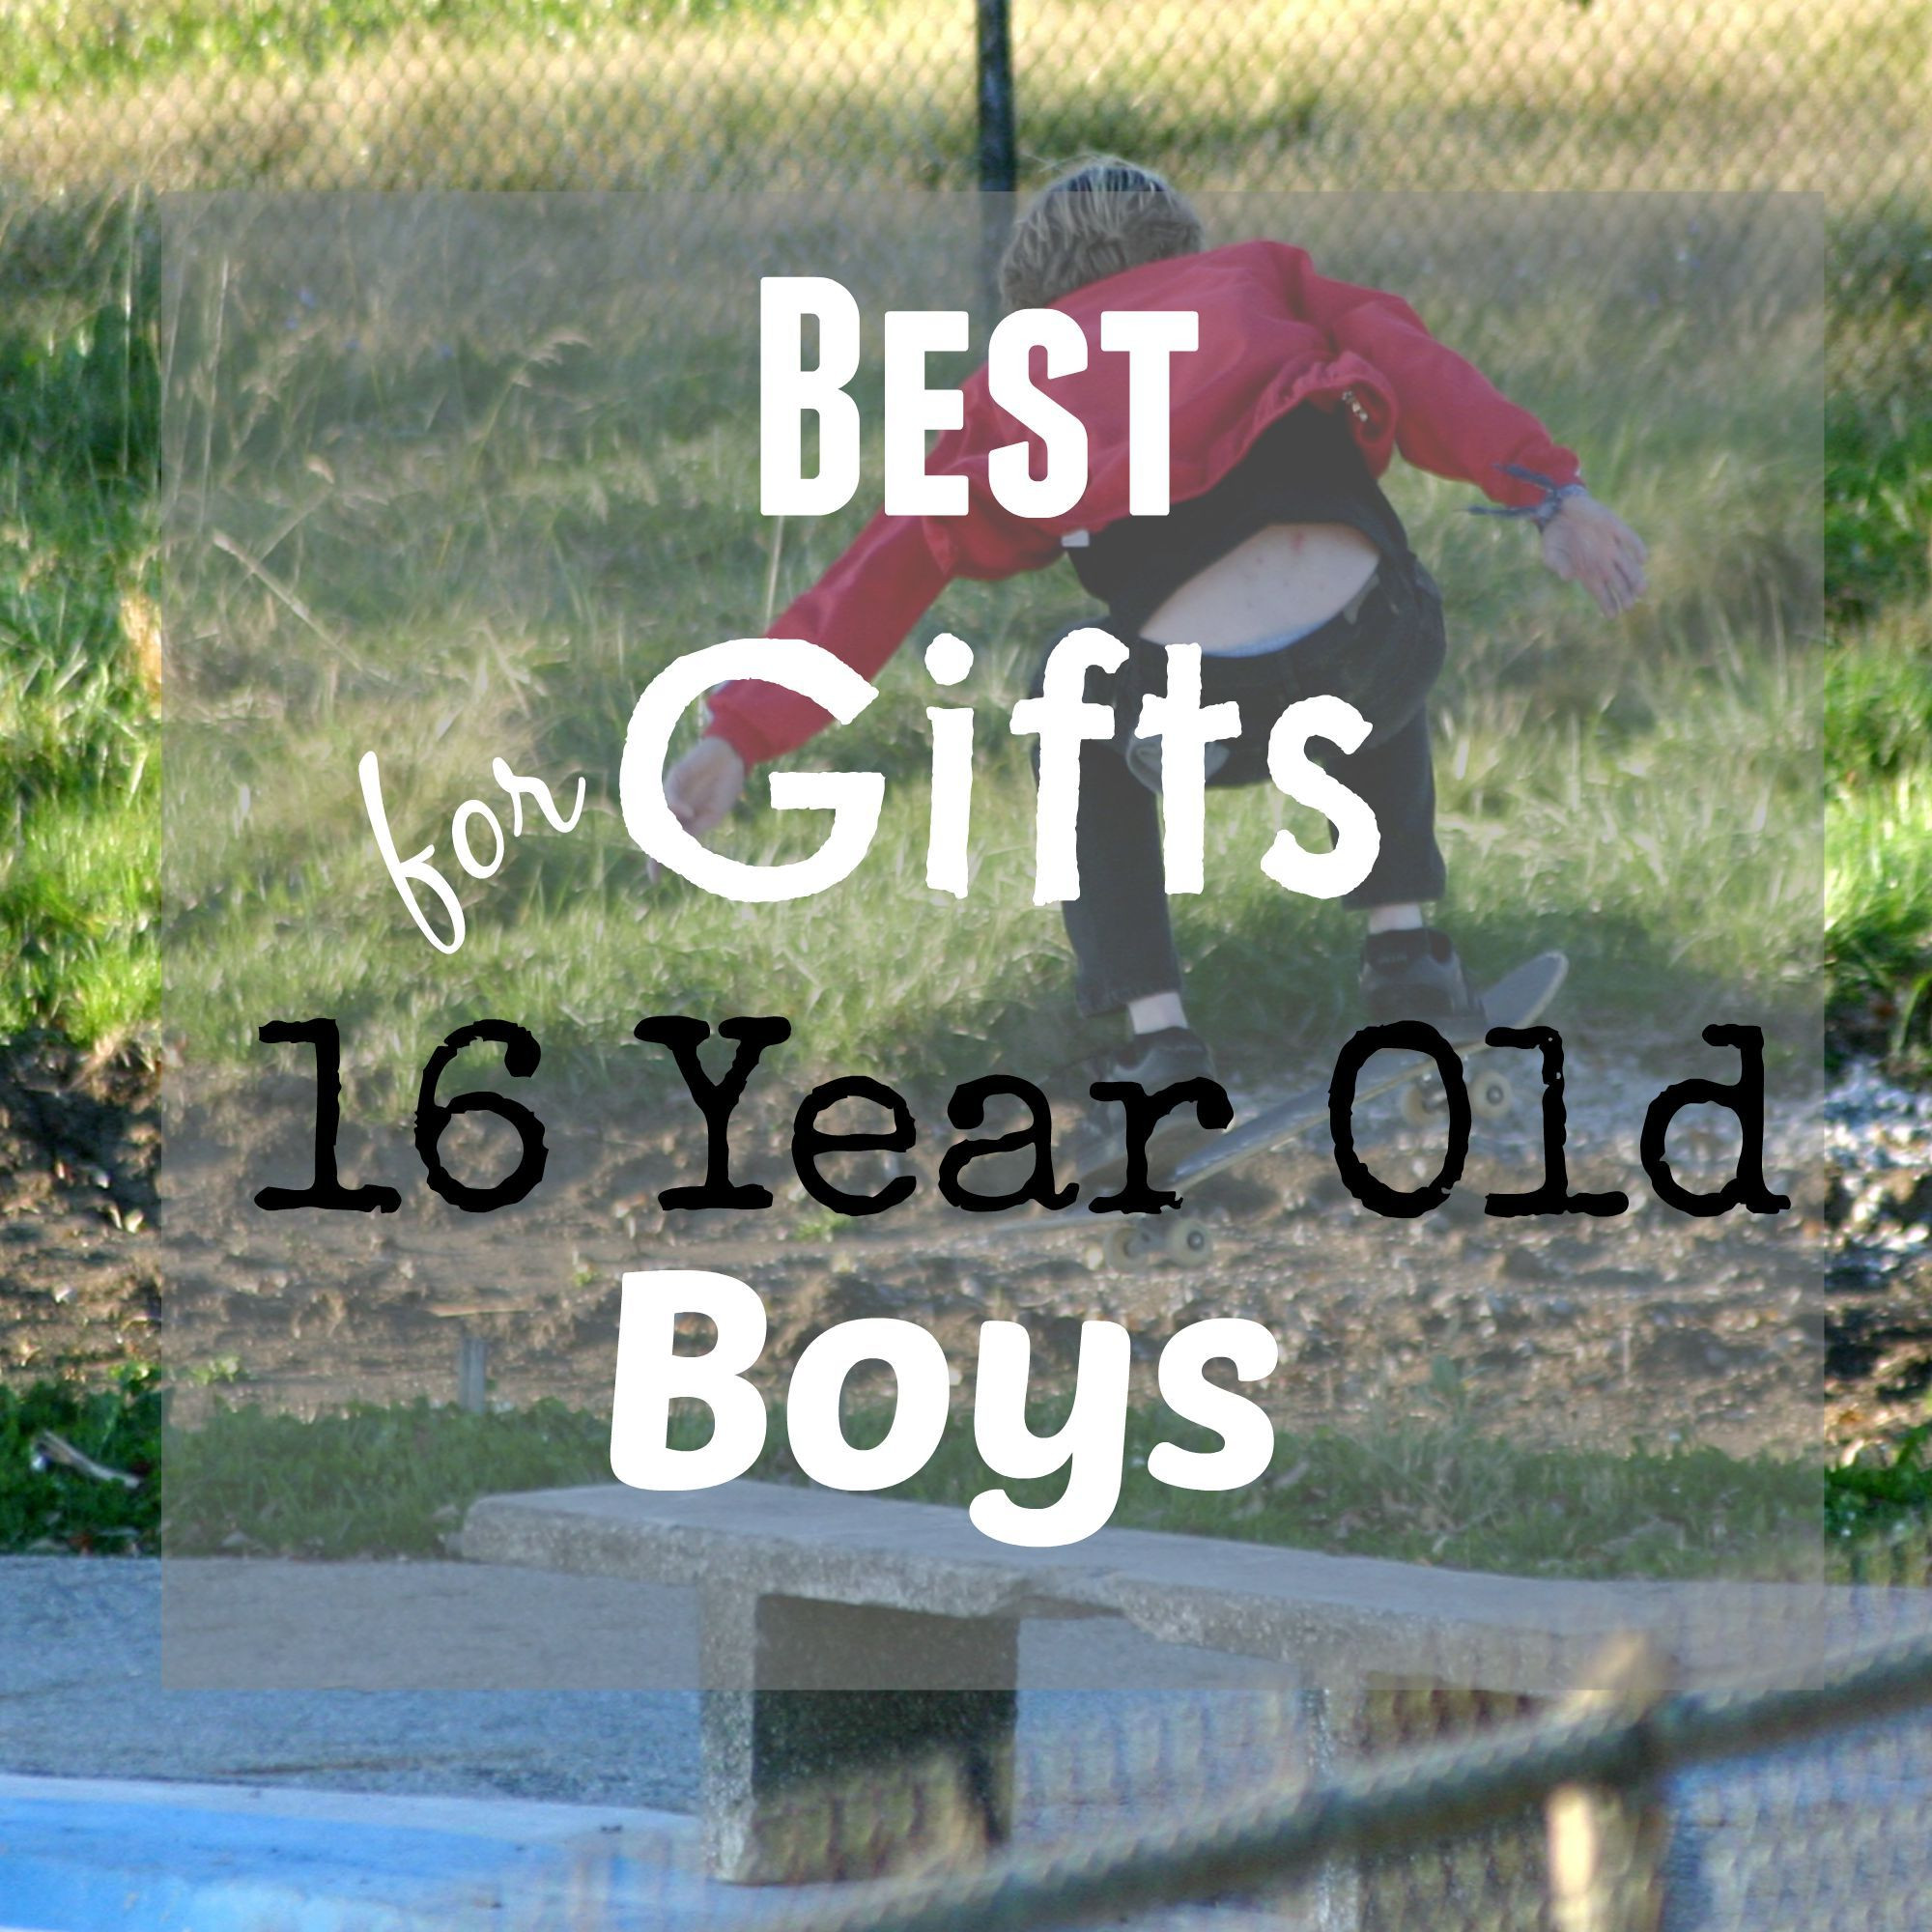 Birthday Gift Ideas 16 Year Old Boy
 Best Gifts and Toys for 16 Year Old Boys